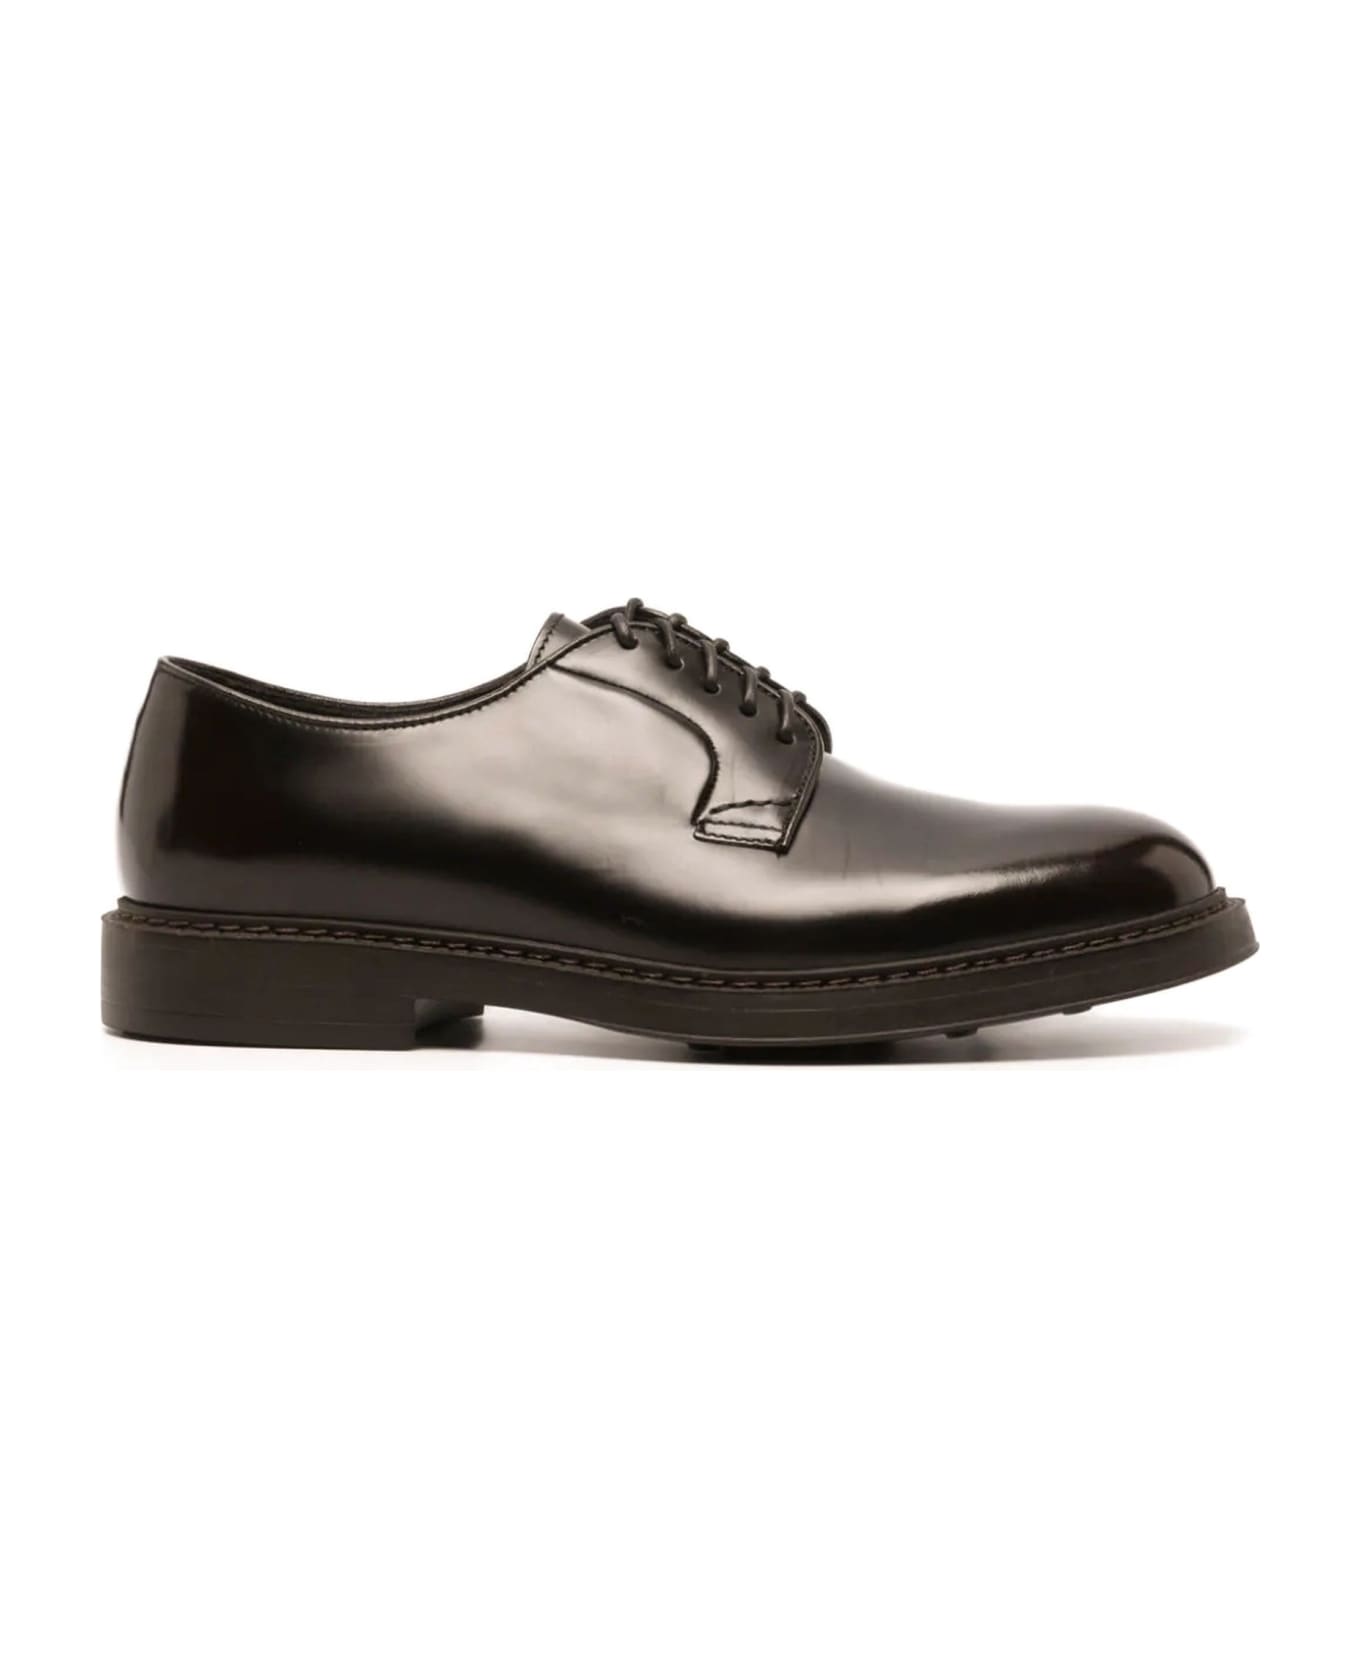 Doucal's Brown Calf Leather Derby Shoes - Moro